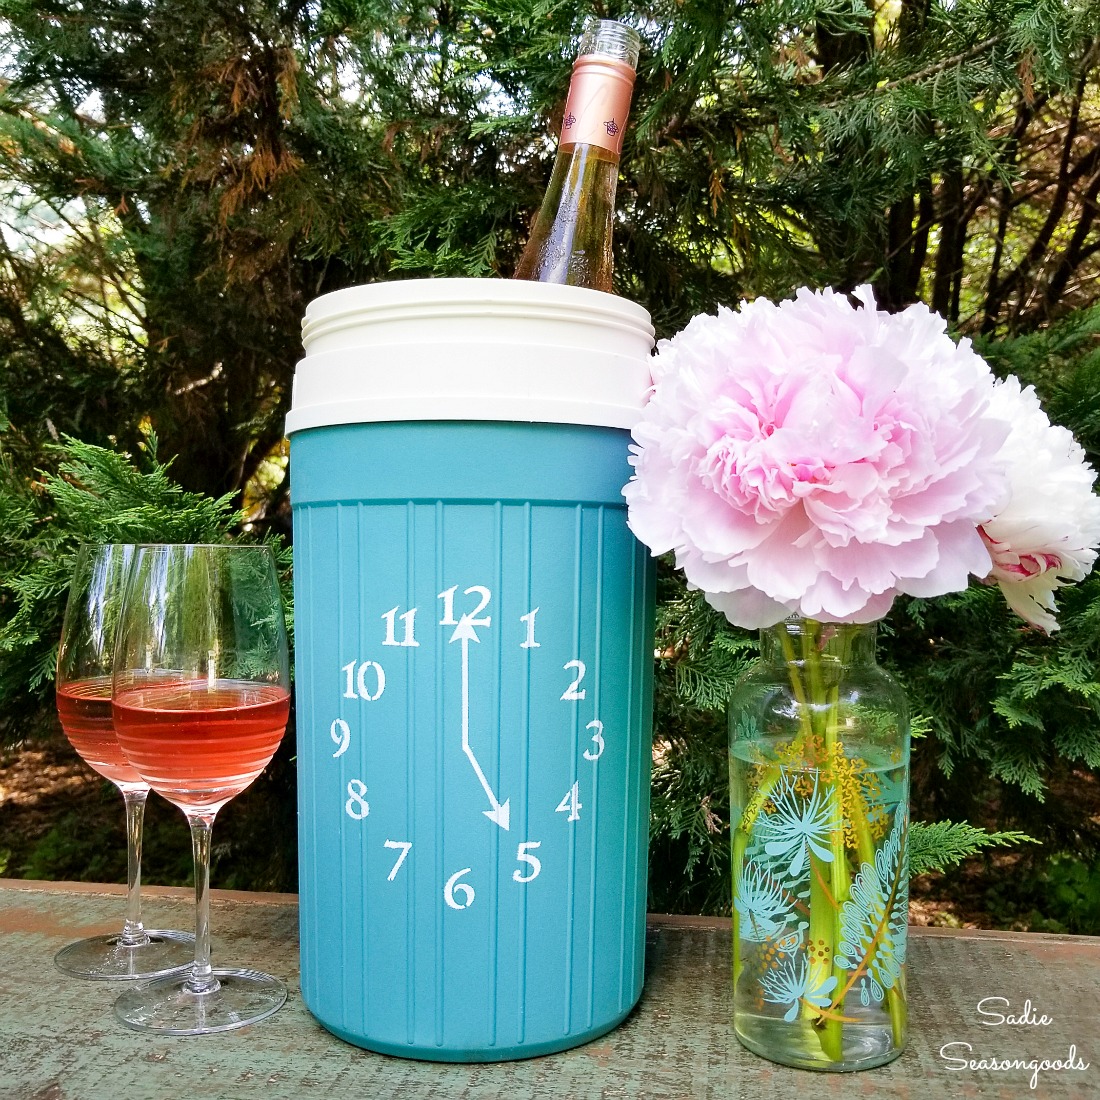 Wine bottle cooler for a patio happy hour from an Igloo beverage cooler